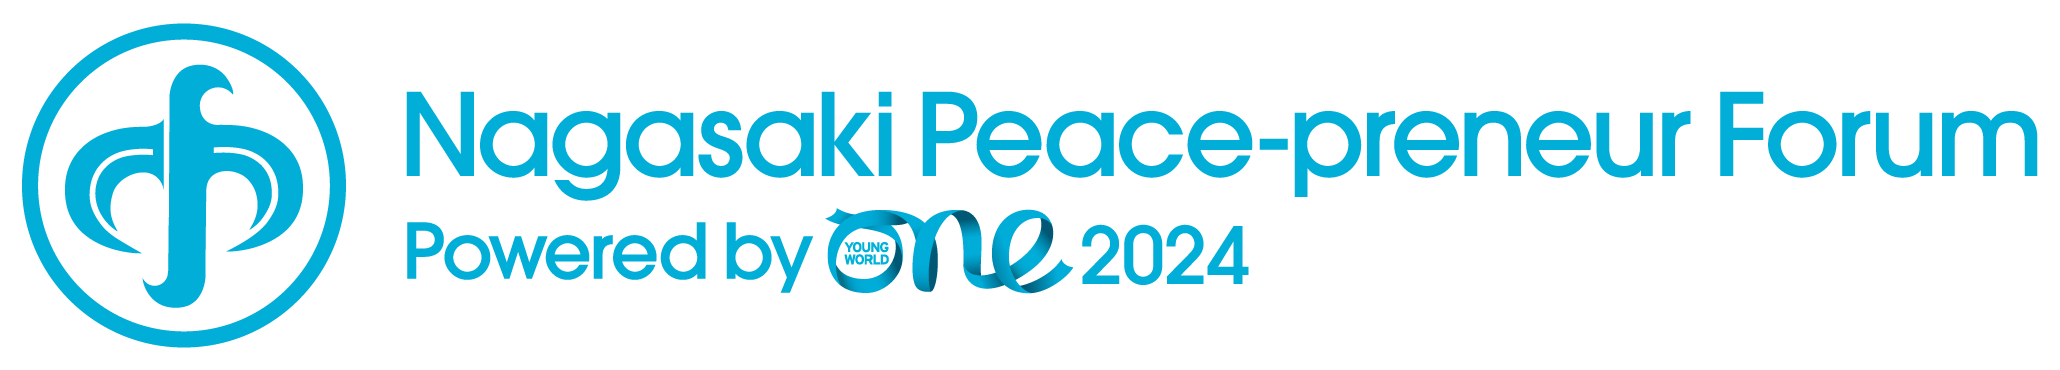 Nagasaki Peace-preneur Forum Powered by One Young World 2024